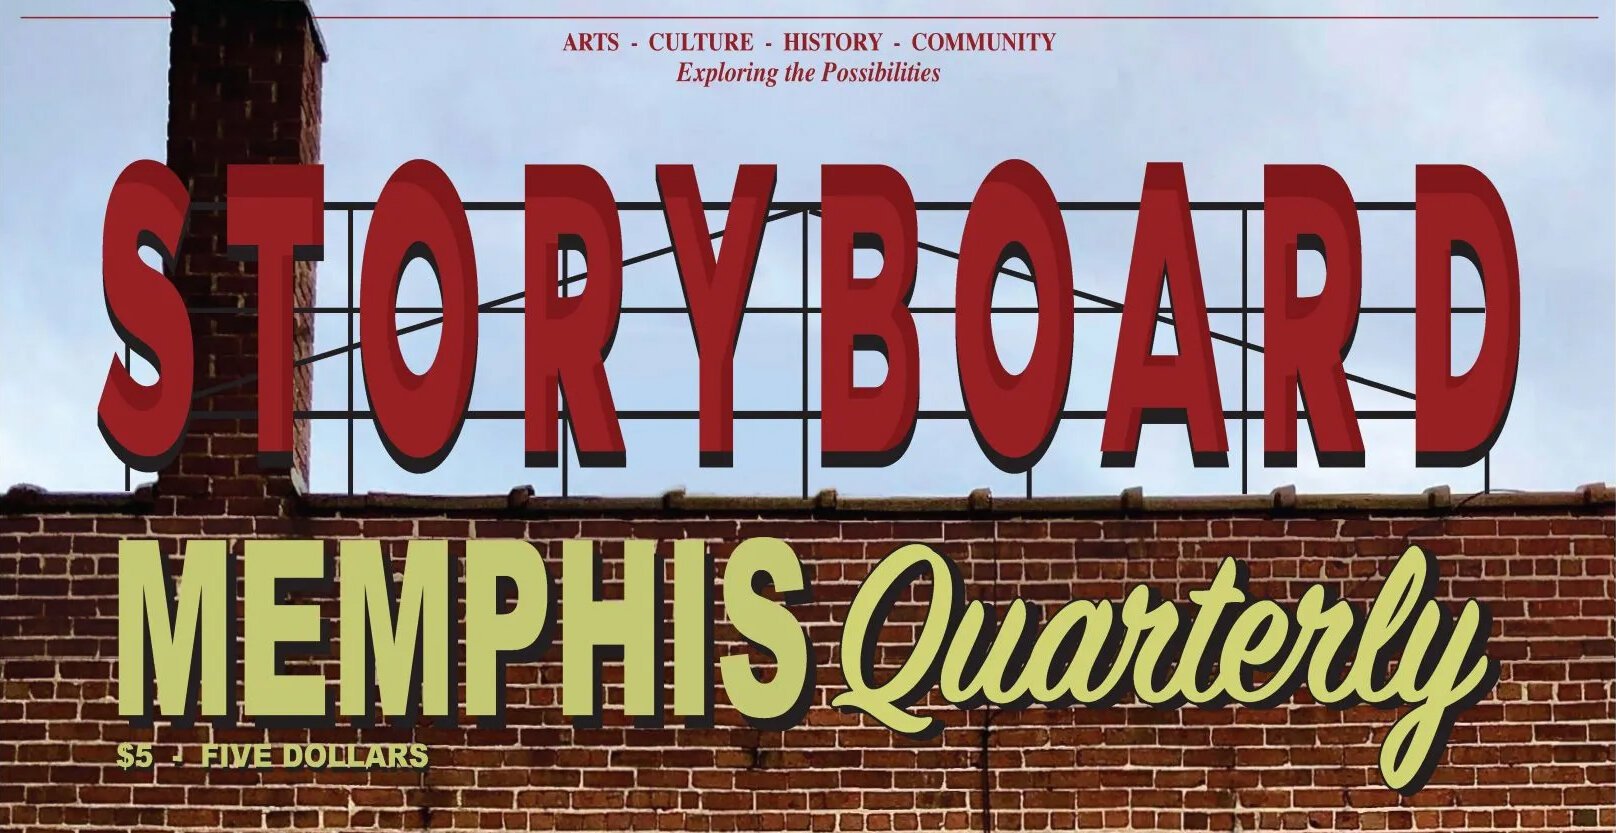 Local publication StoryBoard Memphis returned to print in November of 2021. (submitted) 